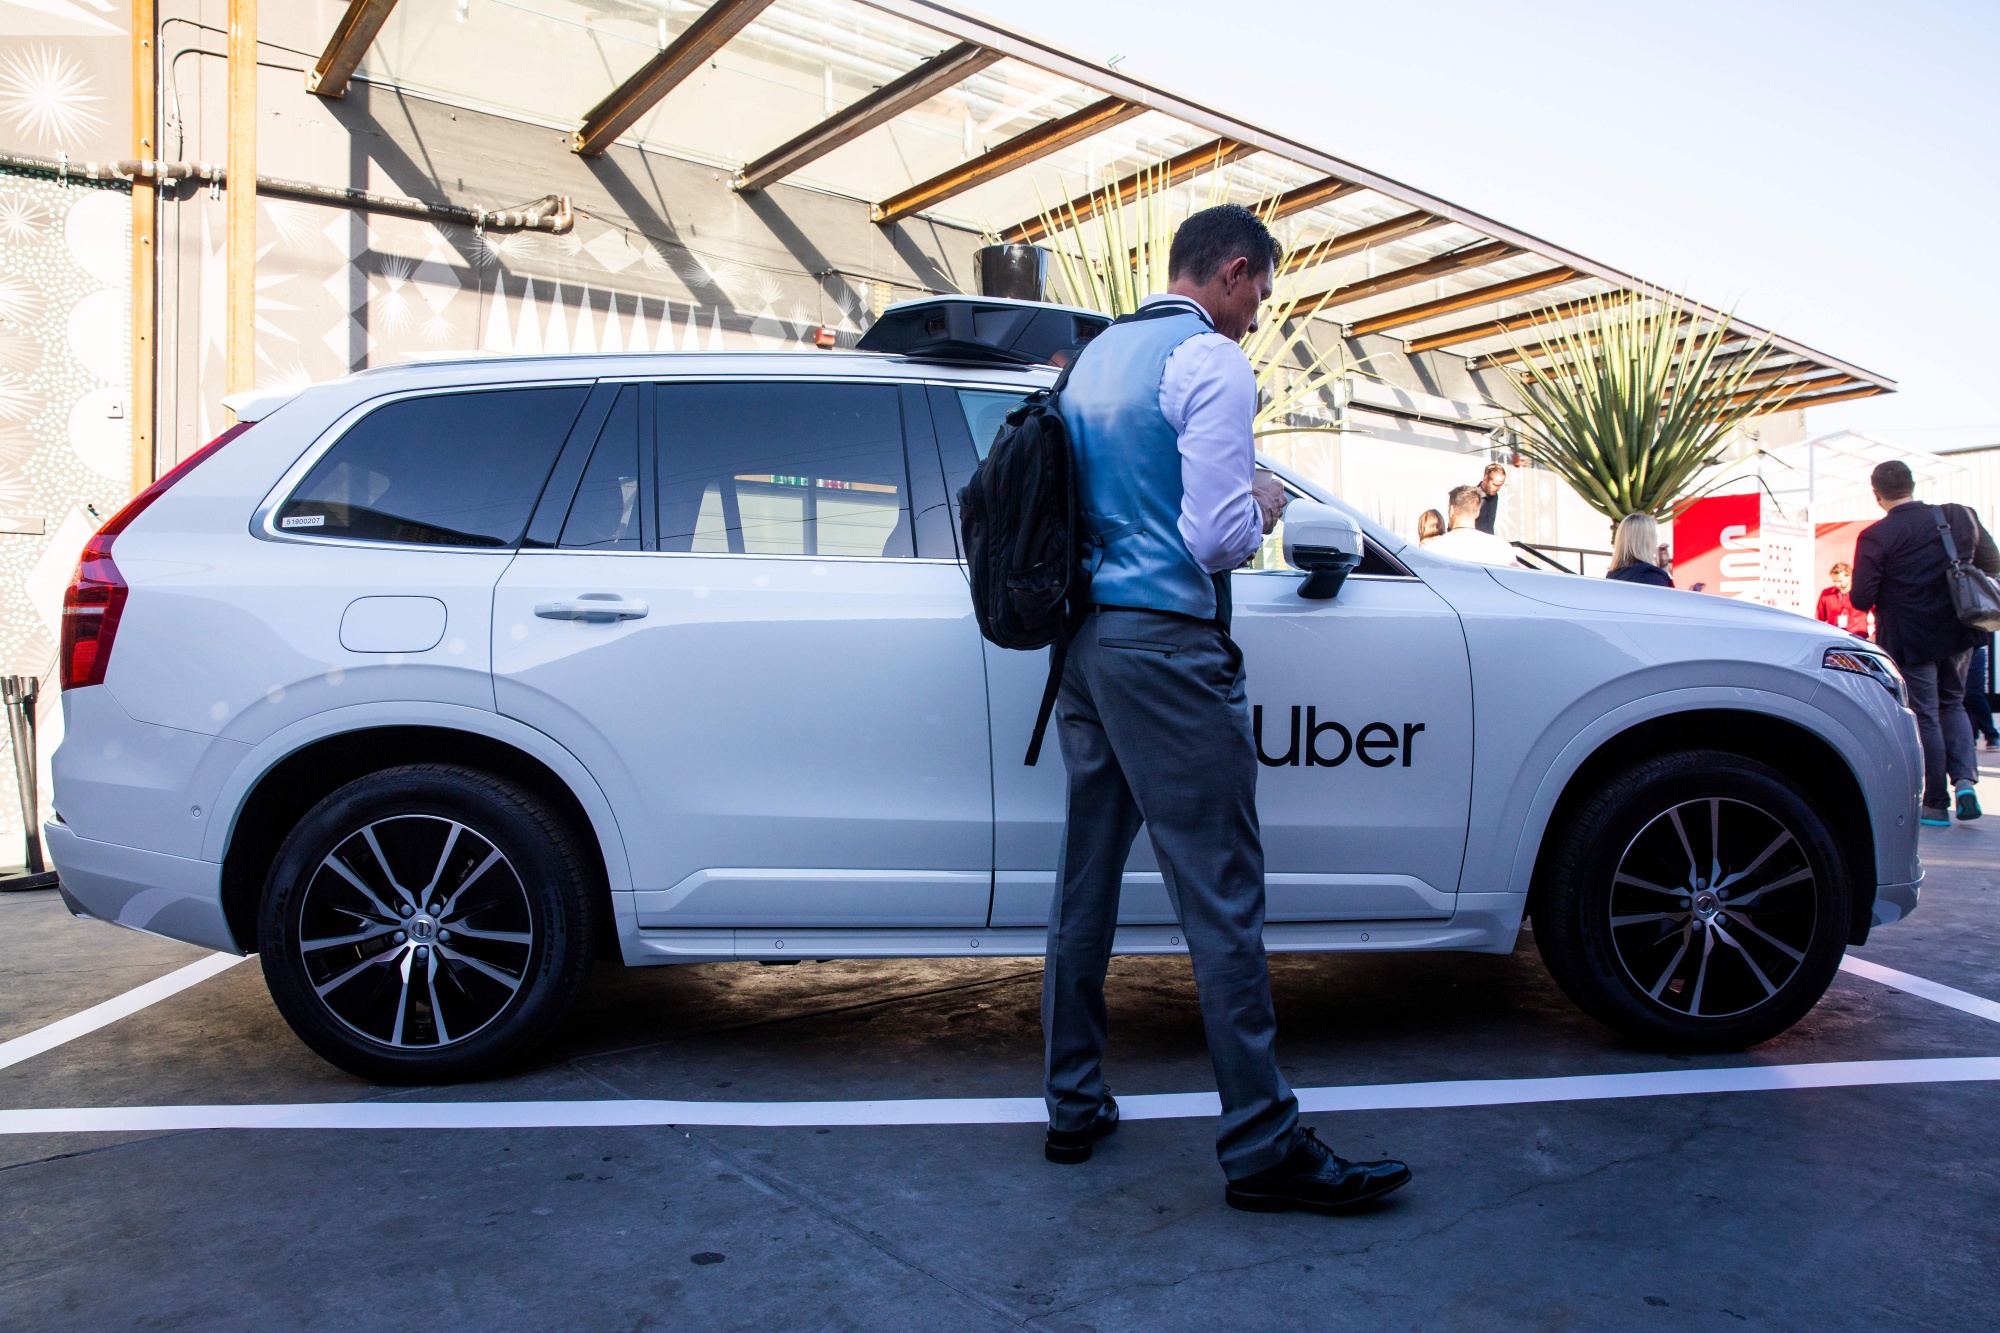 Ride-hailing apps are a key part of the new urban economy.